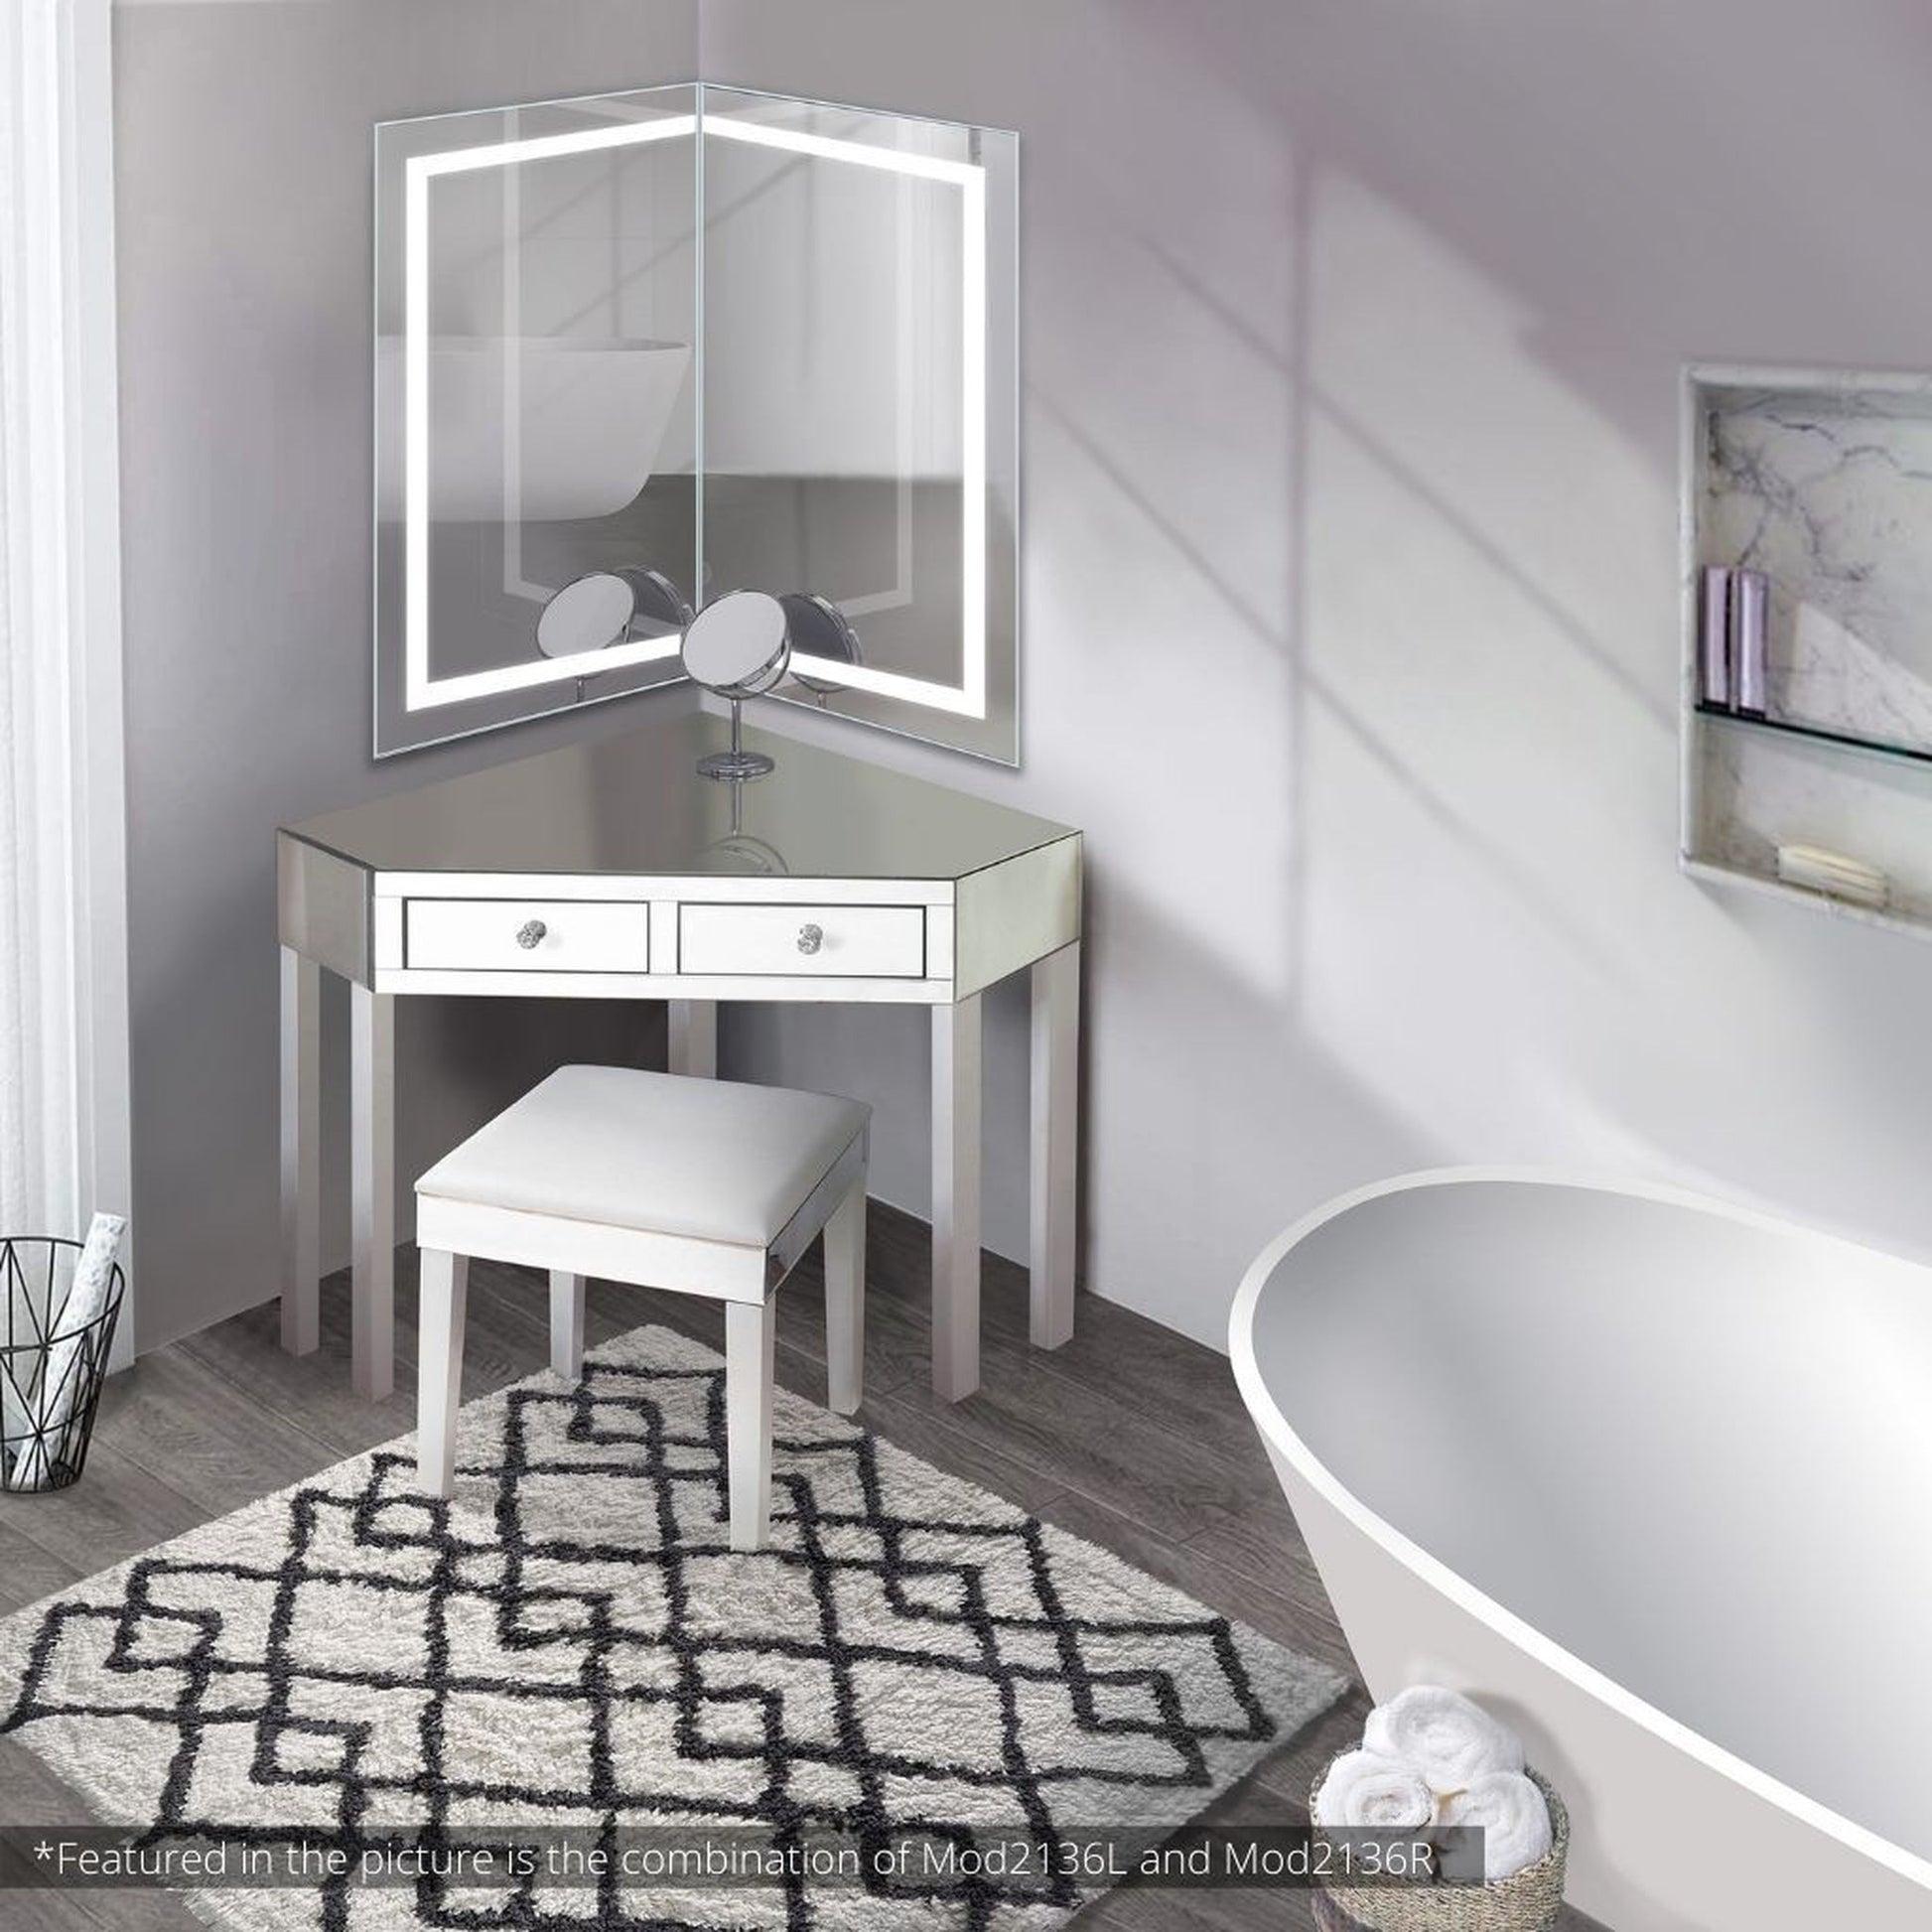 Krugg Reflections Mod 21" x 36" 5000K Rectangular Left Configuration Wall-Mounted Silver-Backed LED Bathroom Vanity Mirror With Built-in Defogger and Dimmer